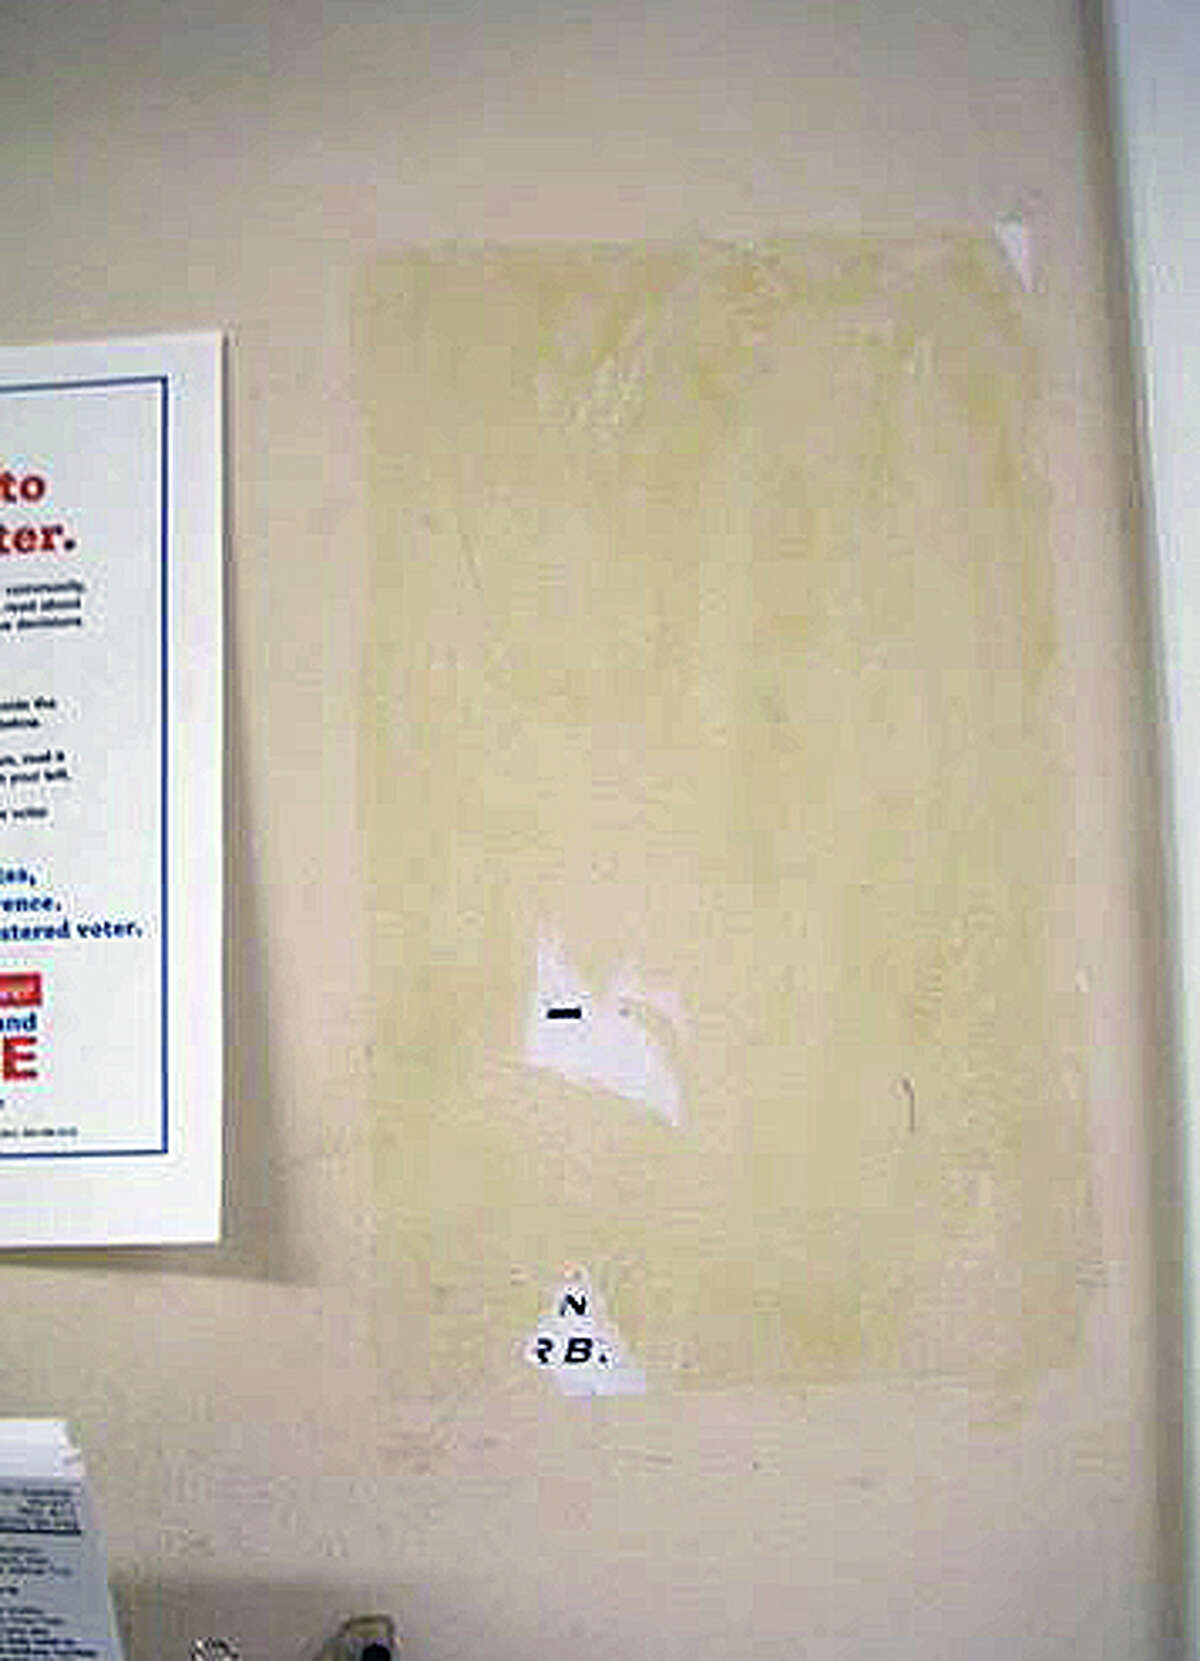 A blank spot on the wall outside the Registrar of Voters office in Old Town Hall. The missing sign indicated that the Republican registar's office was located on the second floor and had apparently been glued in place.